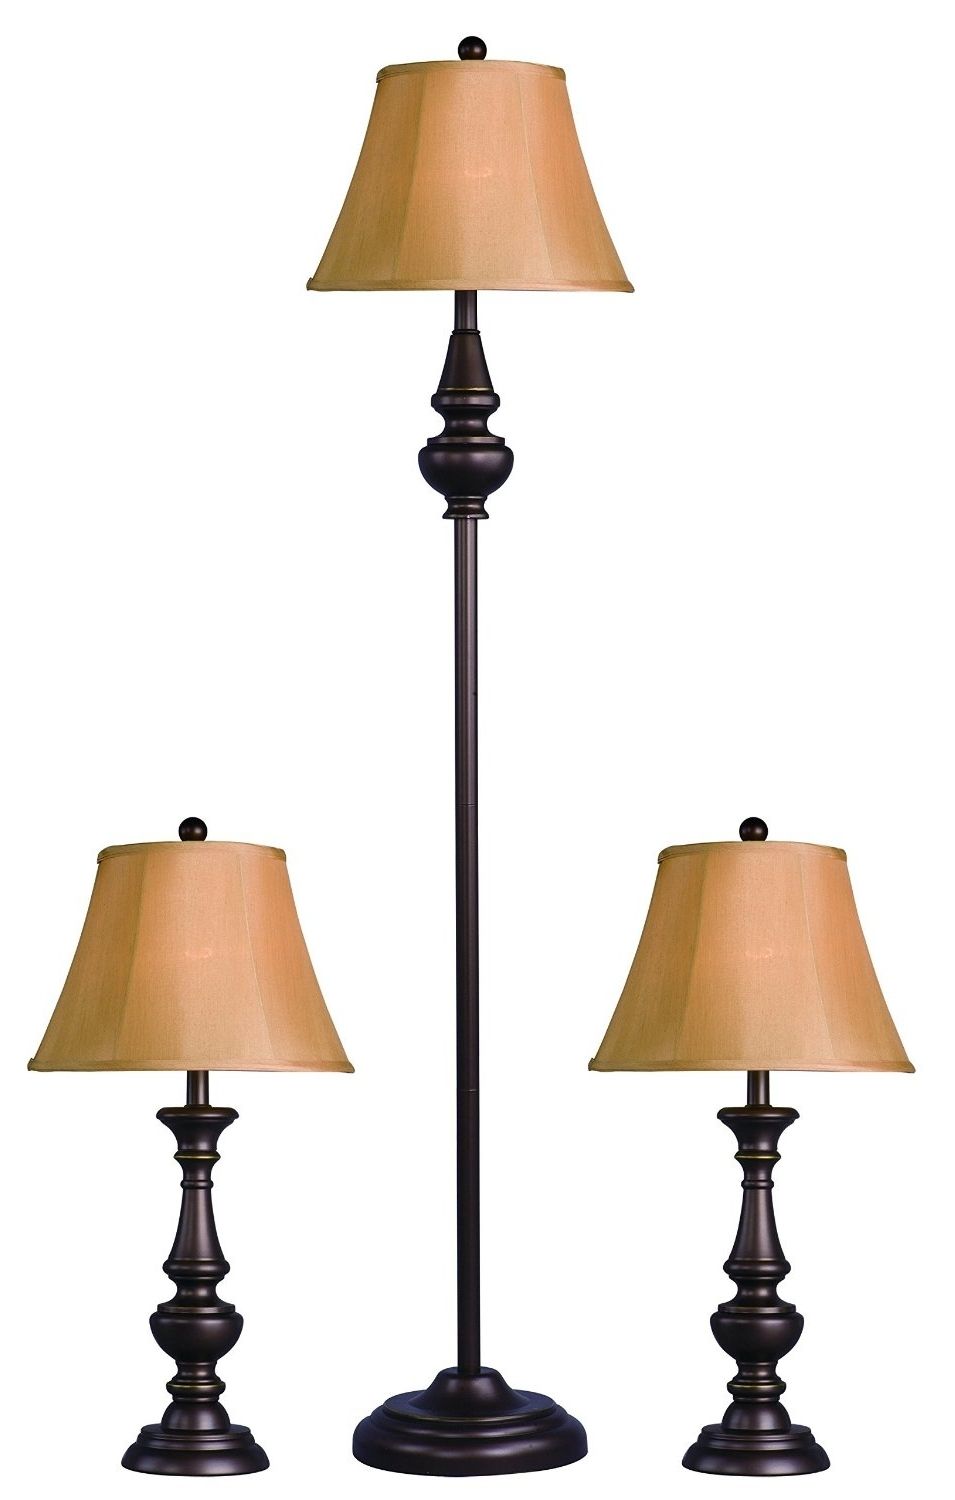 Living Room Lamp Set Antique Bronze Table Lamp Set With Hand Crafted With Widely Used Bronze Living Room Table Lamps (View 19 of 20)